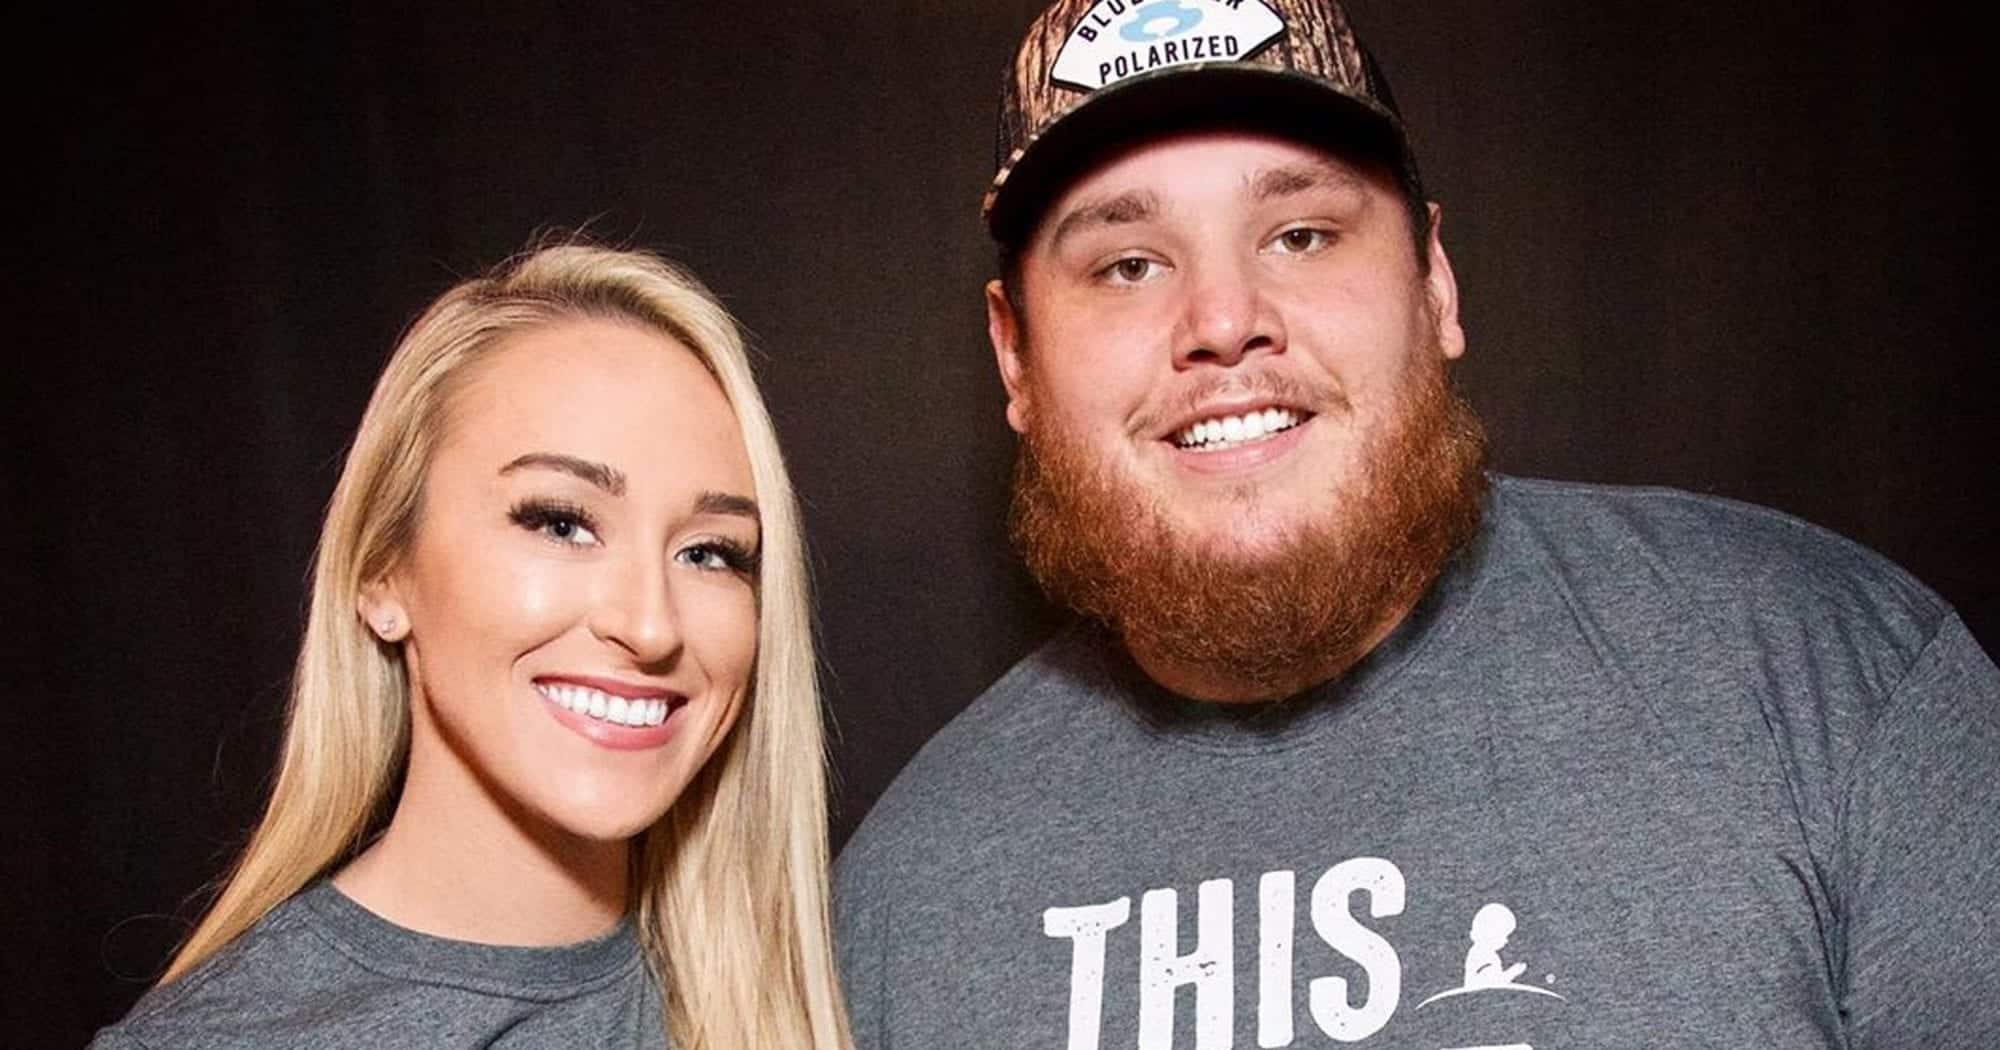 Share0 Tweet0 Share0 Luke Combs and wife Nicole Hocking just got hitched la...